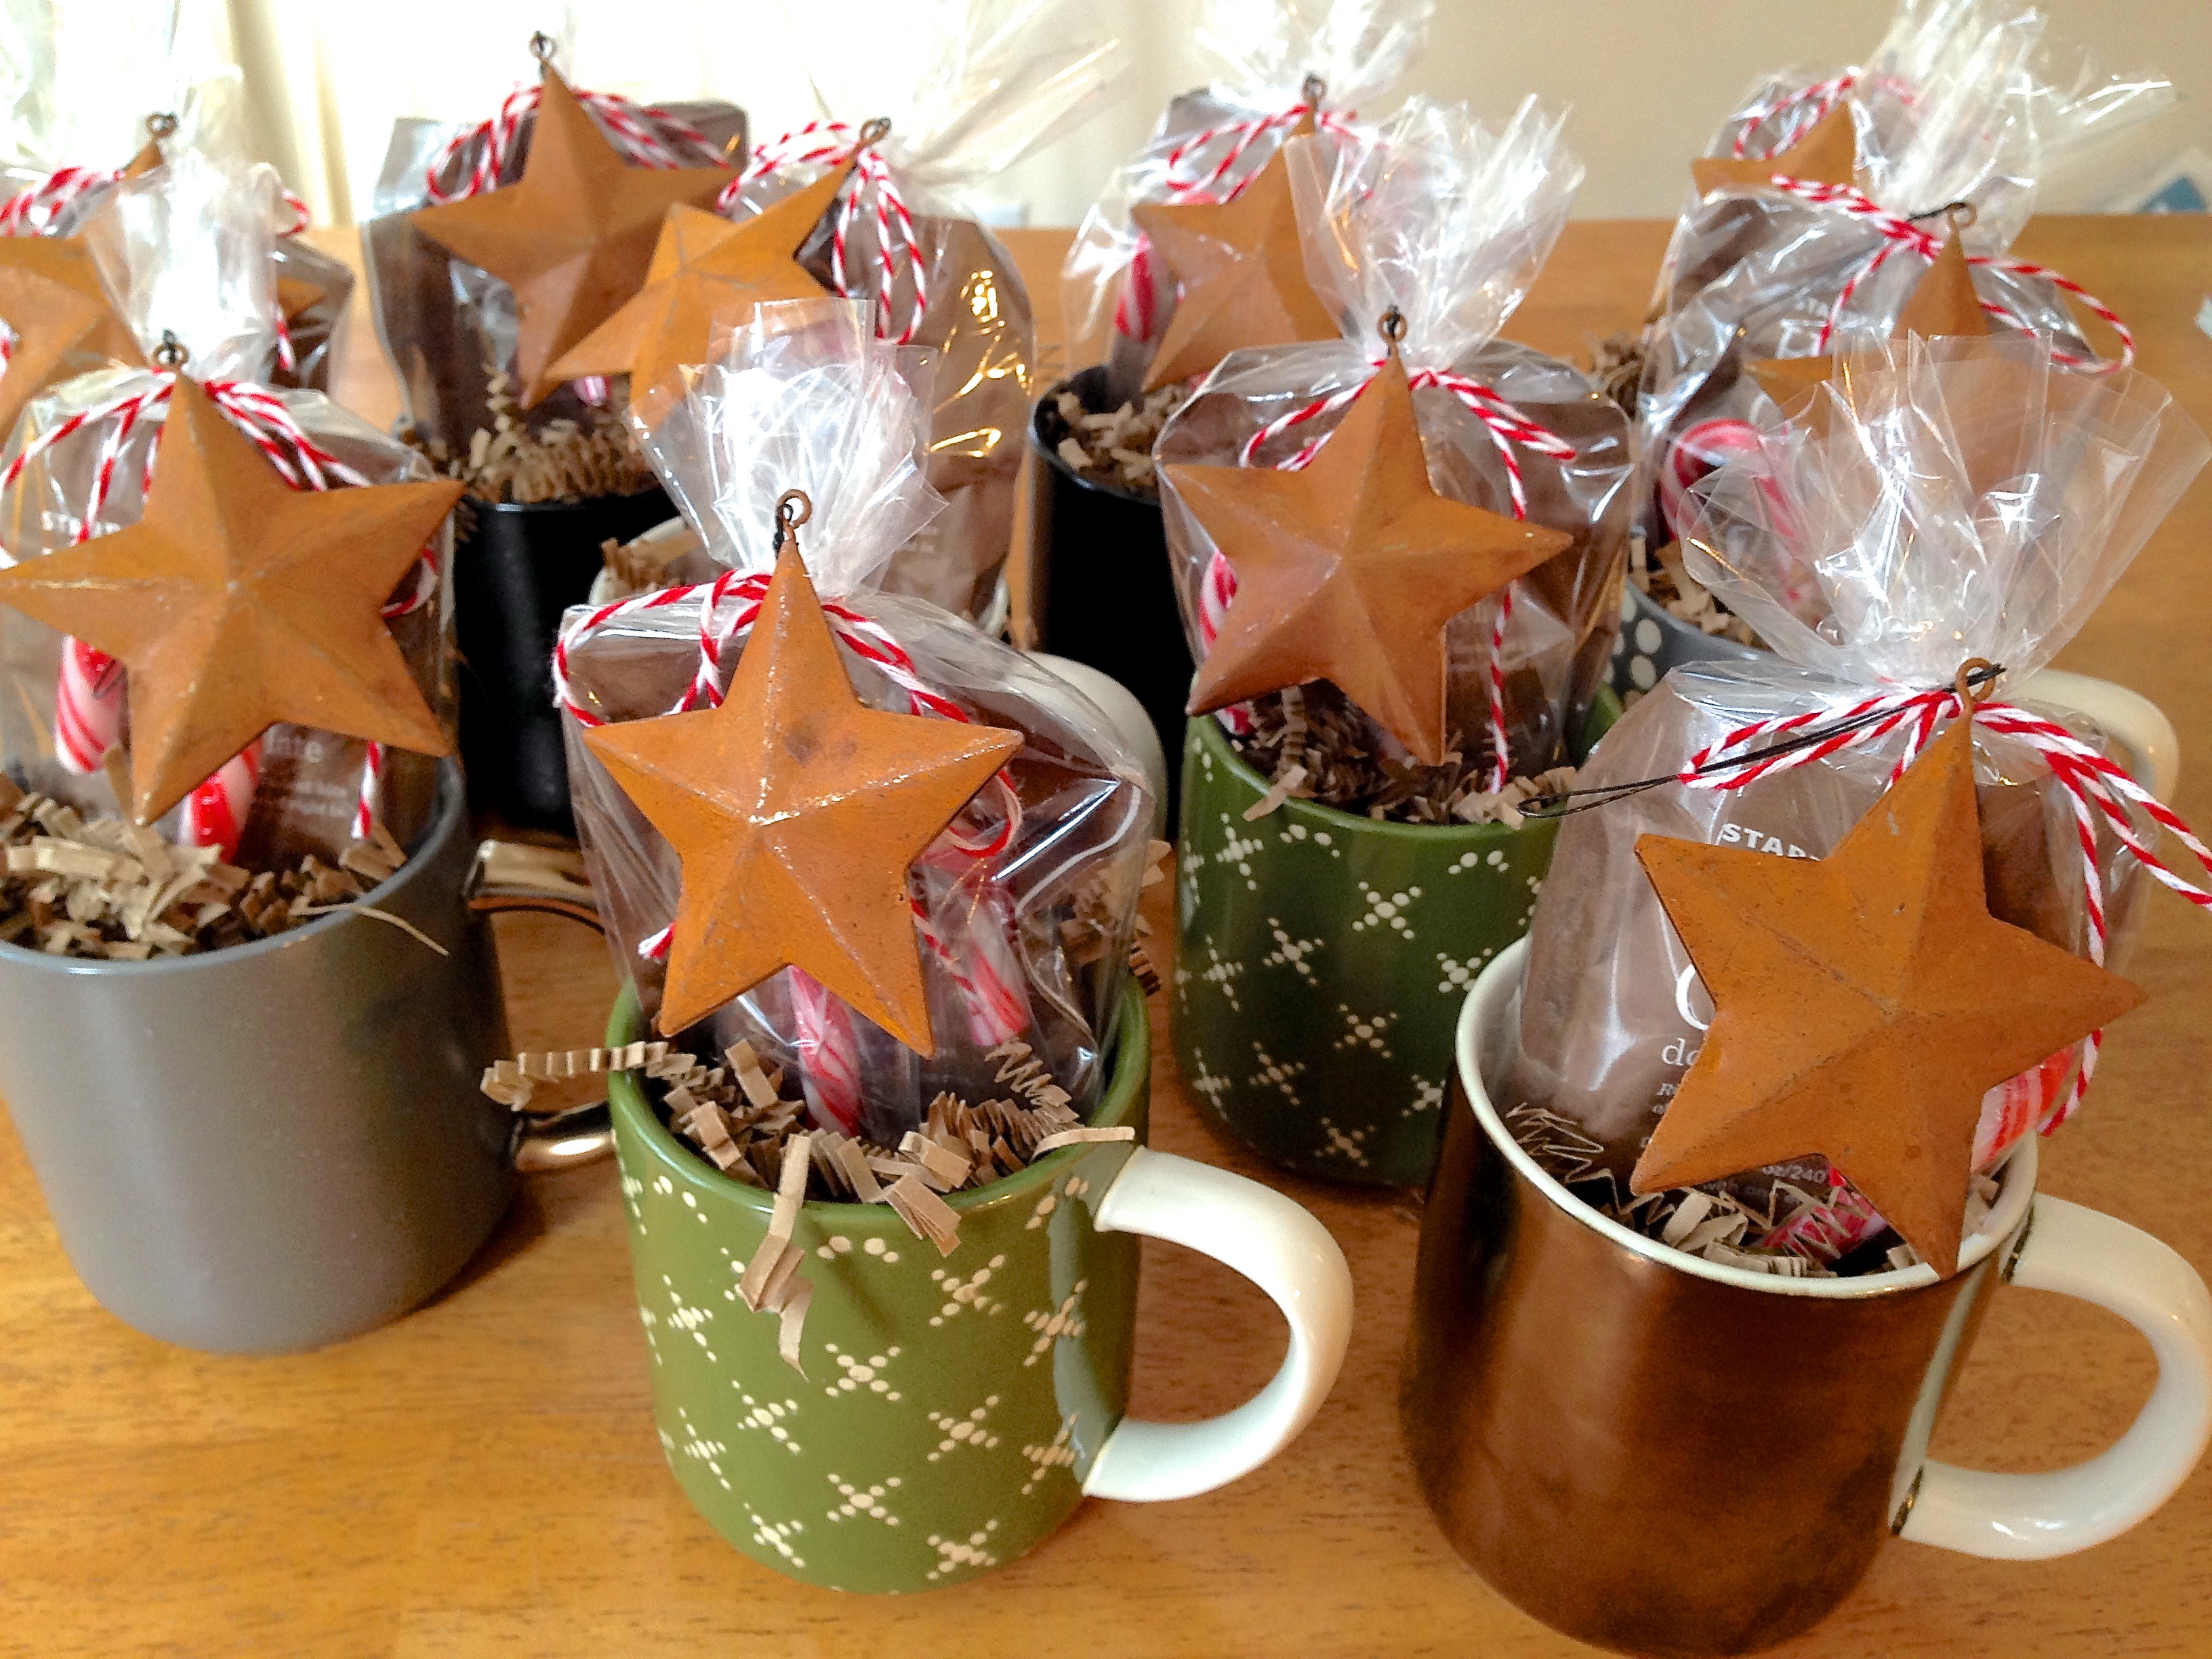 12 Days of Projects Day 9 Cocoa Gift Mugs p.s. bonjour